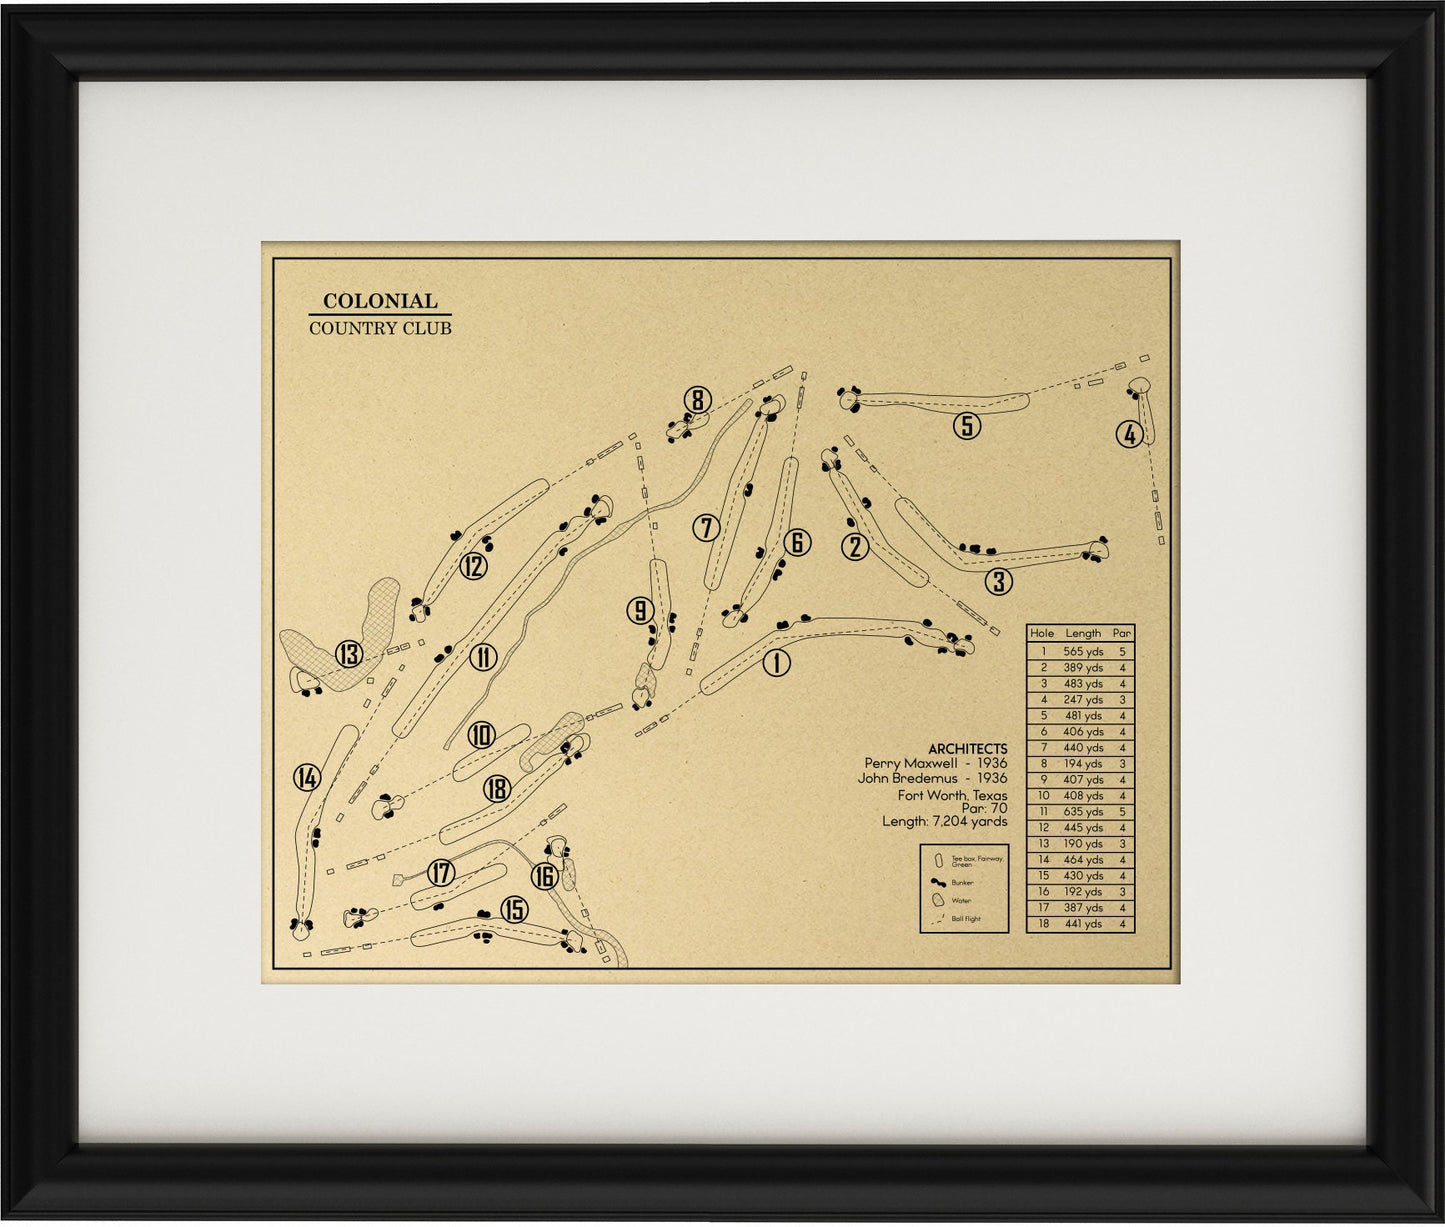 Colonial Country Club Outline (Print)